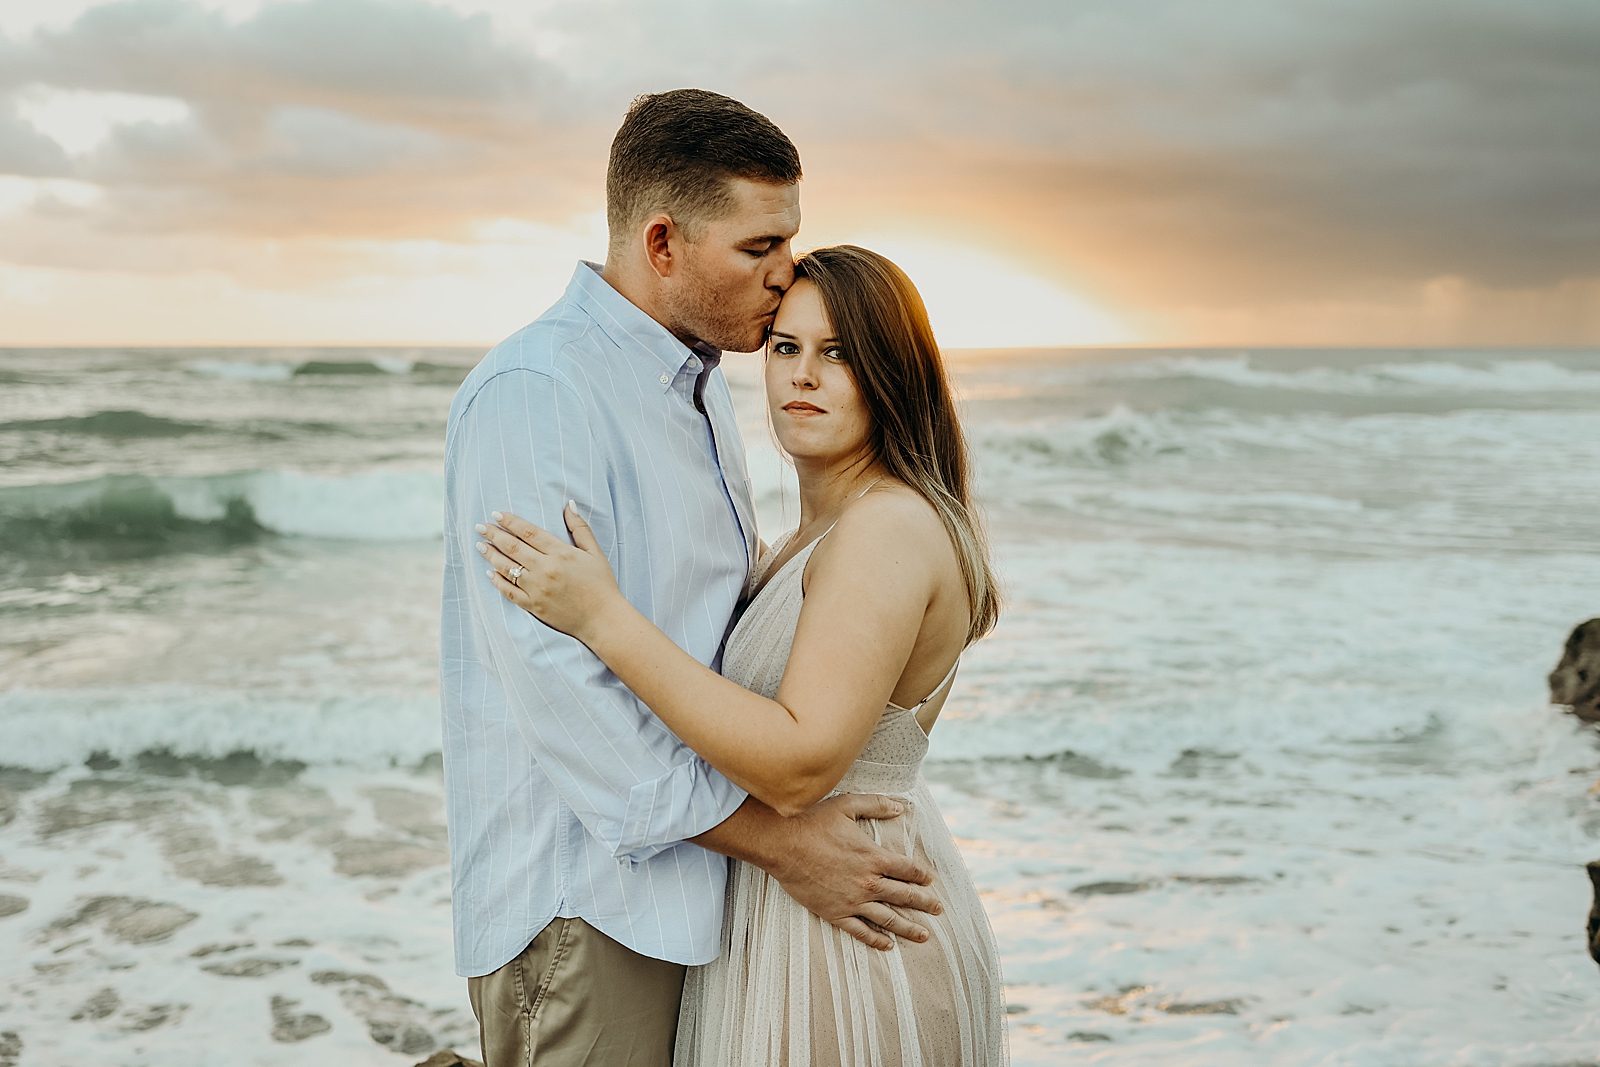 Man kisses woman on the side of her head in front of ocean waves Coral Cove Park Engagement Photography captured by South Florida Family Photographer Maggie Alvarez Photography